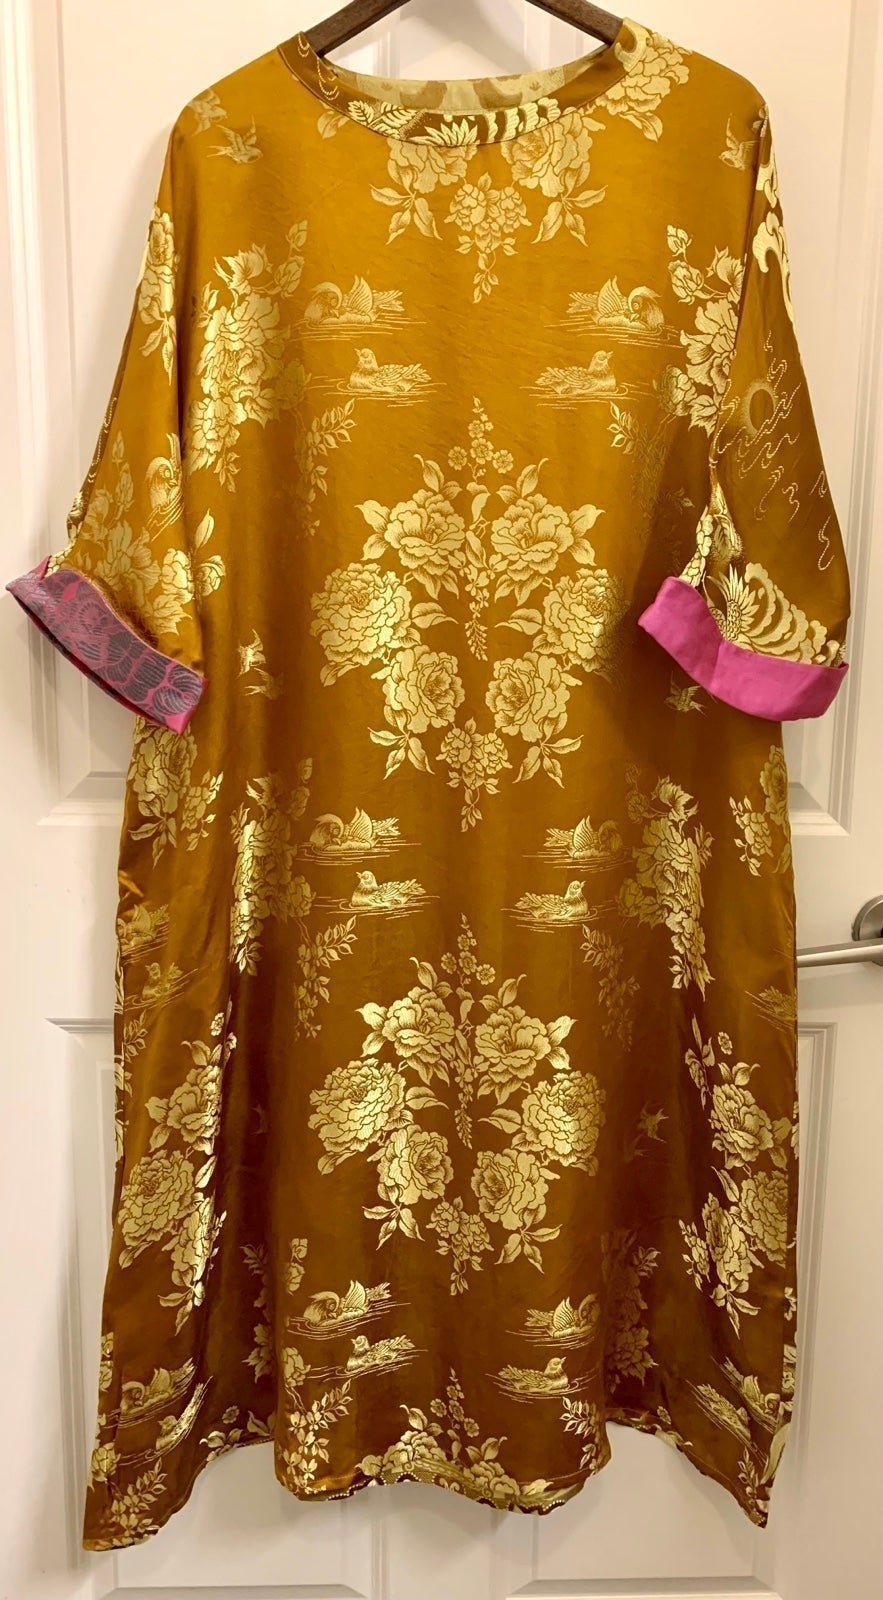 large selection Mulberry Silk Tunic Dress Robe NEW me0X